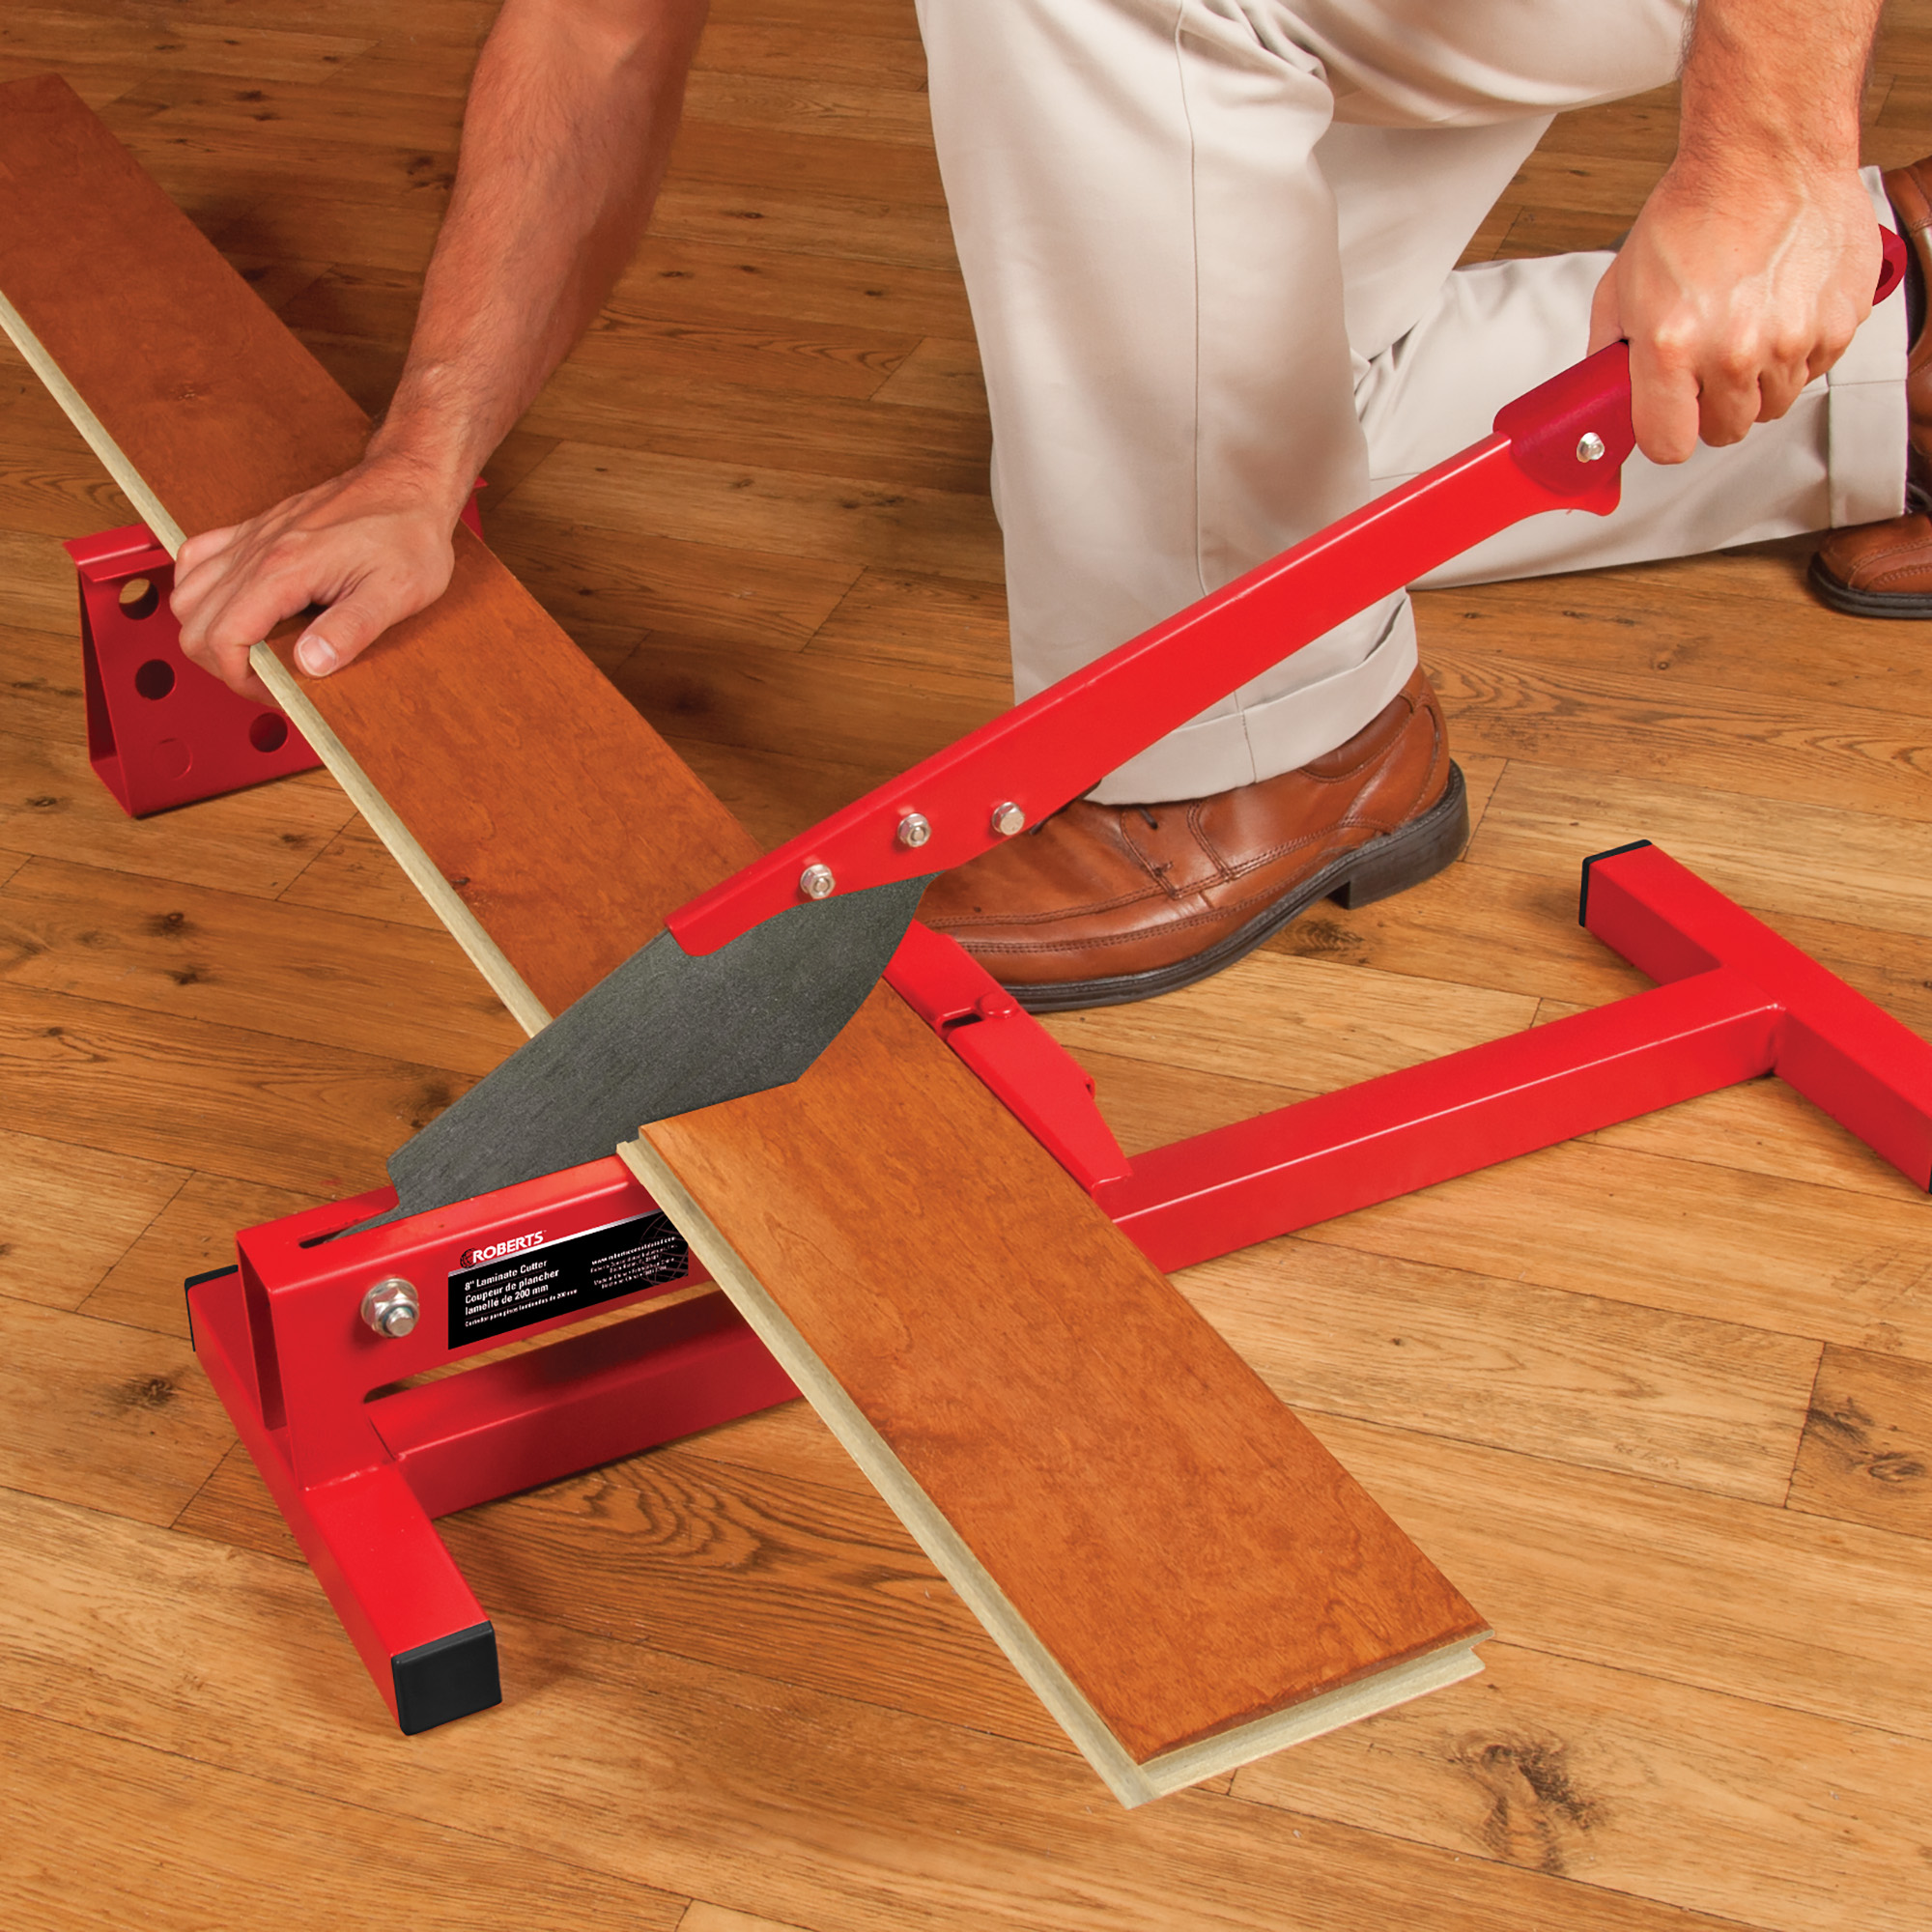 8 Laminate Cutter Roberts Consolidated, What Tools Are Needed To Cut Laminate Flooring